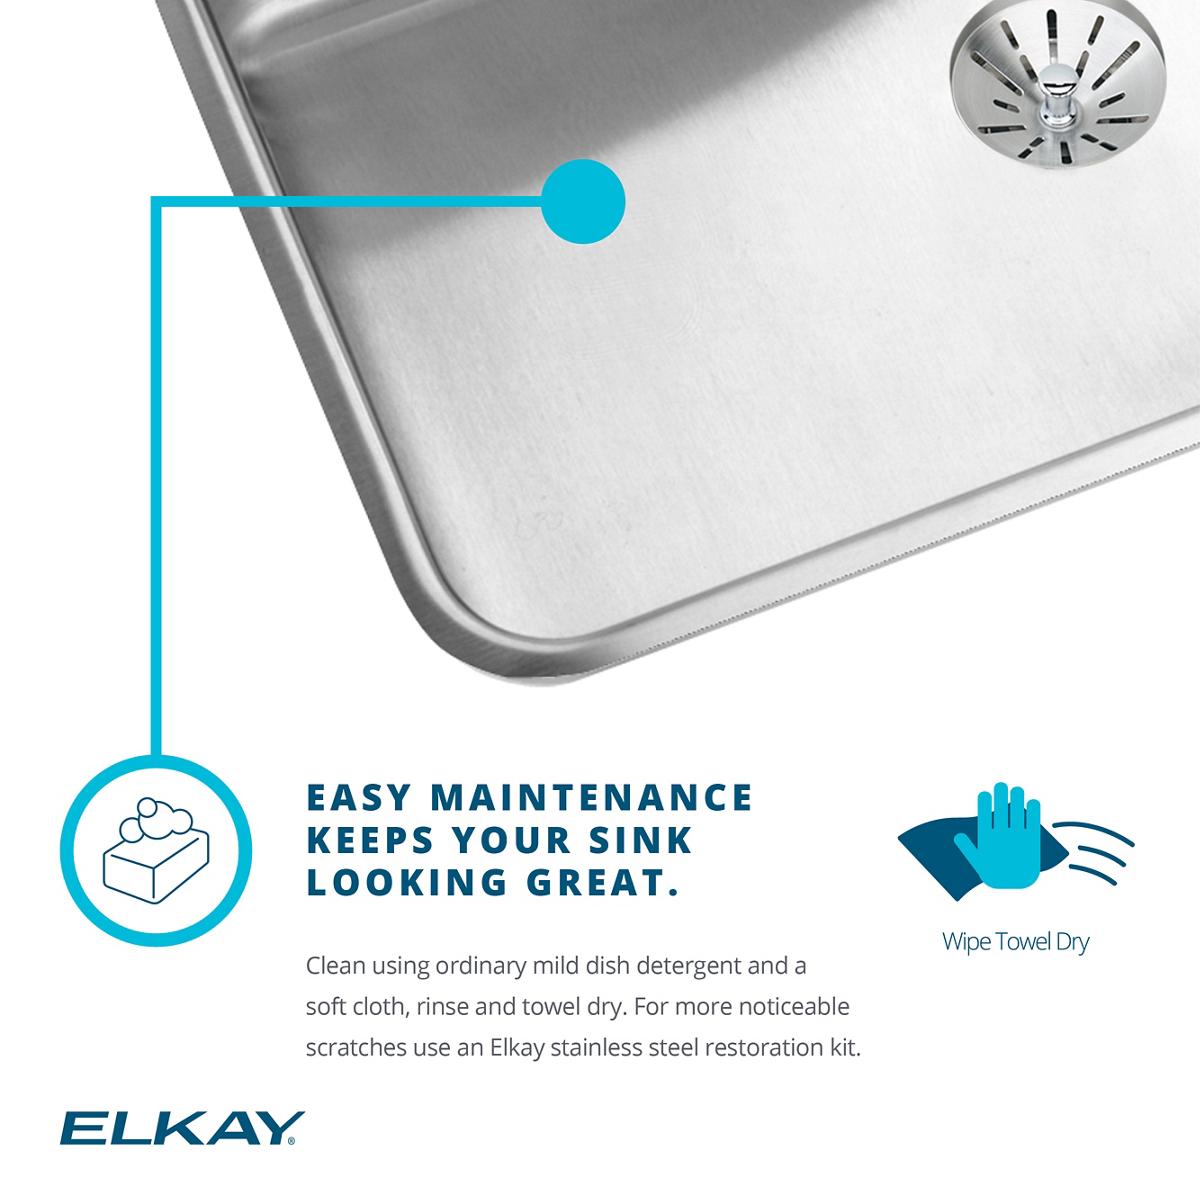 Elkay Lustertone Classic 31" x 22" x 10-1/8" Stainless Steel Single Bowl Drop-in Sink with Perfect Drain